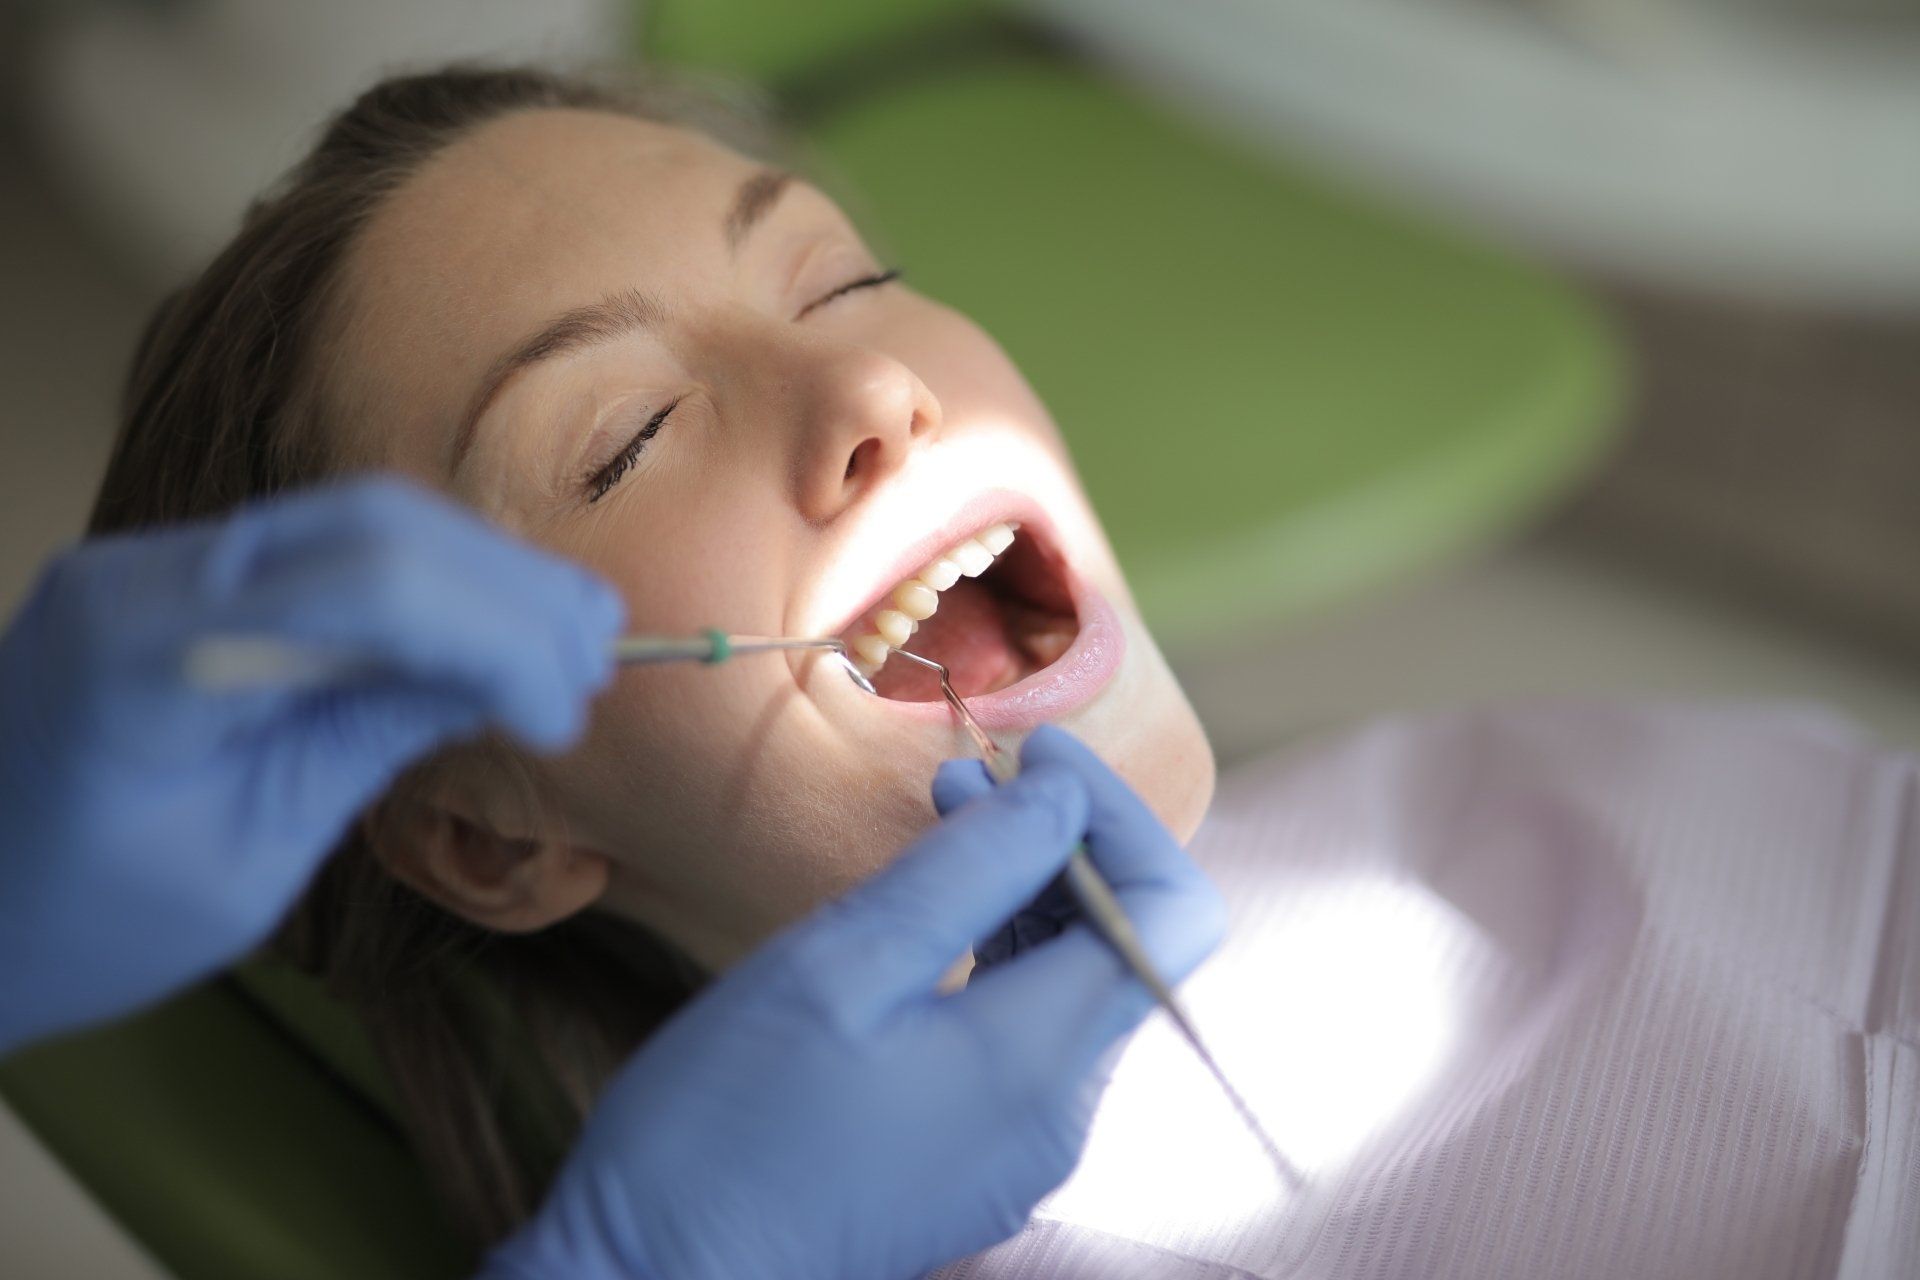 What Are The Best Methods for Teeth Whitening?